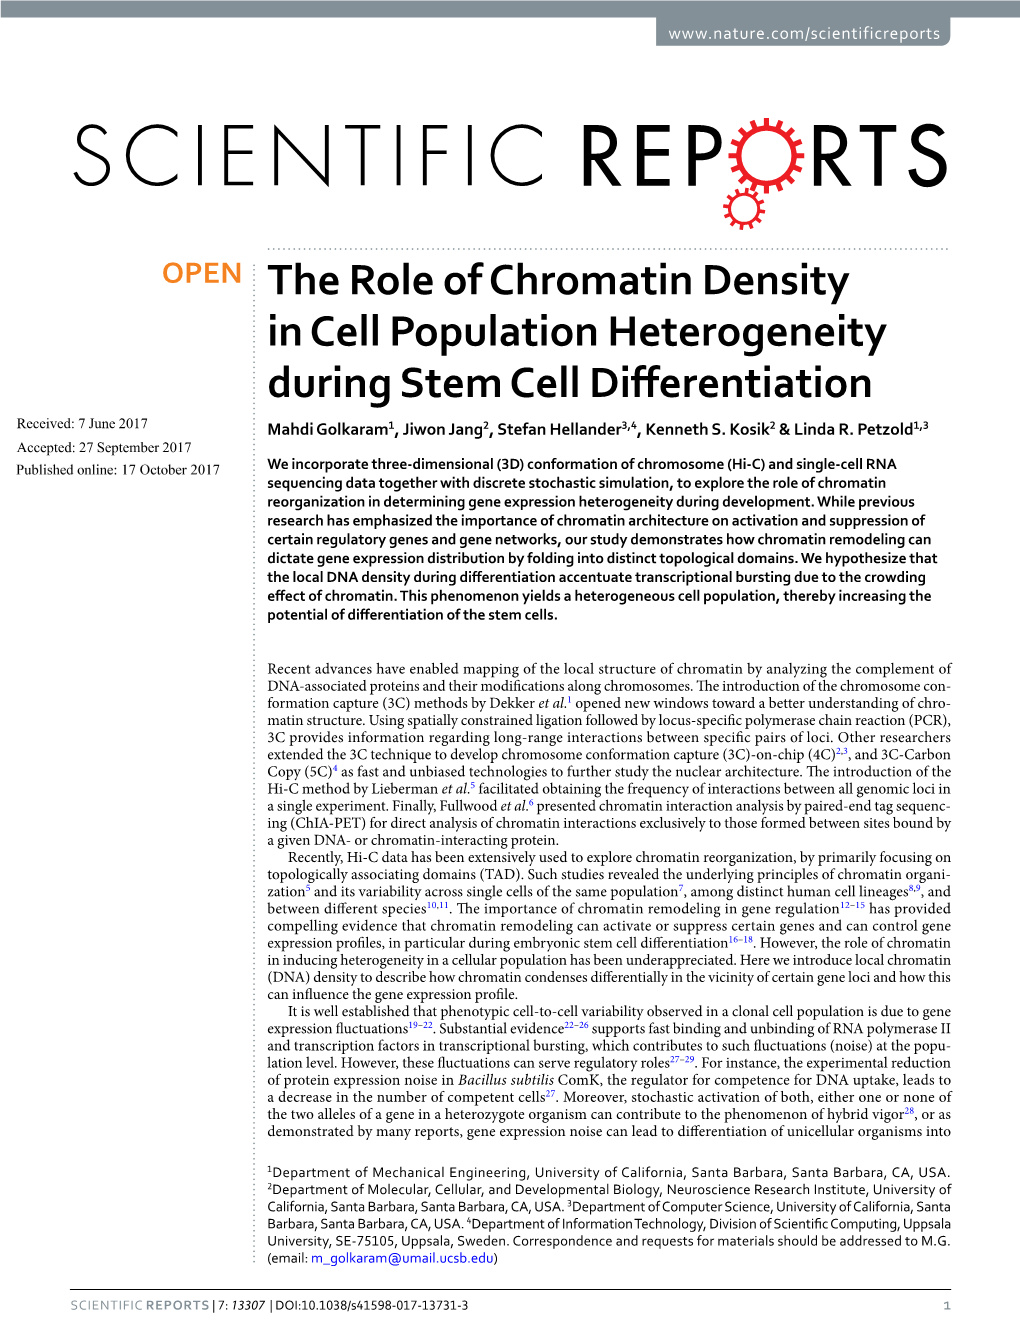 The Role of Chromatin Density in Cell Population Heterogeneity During